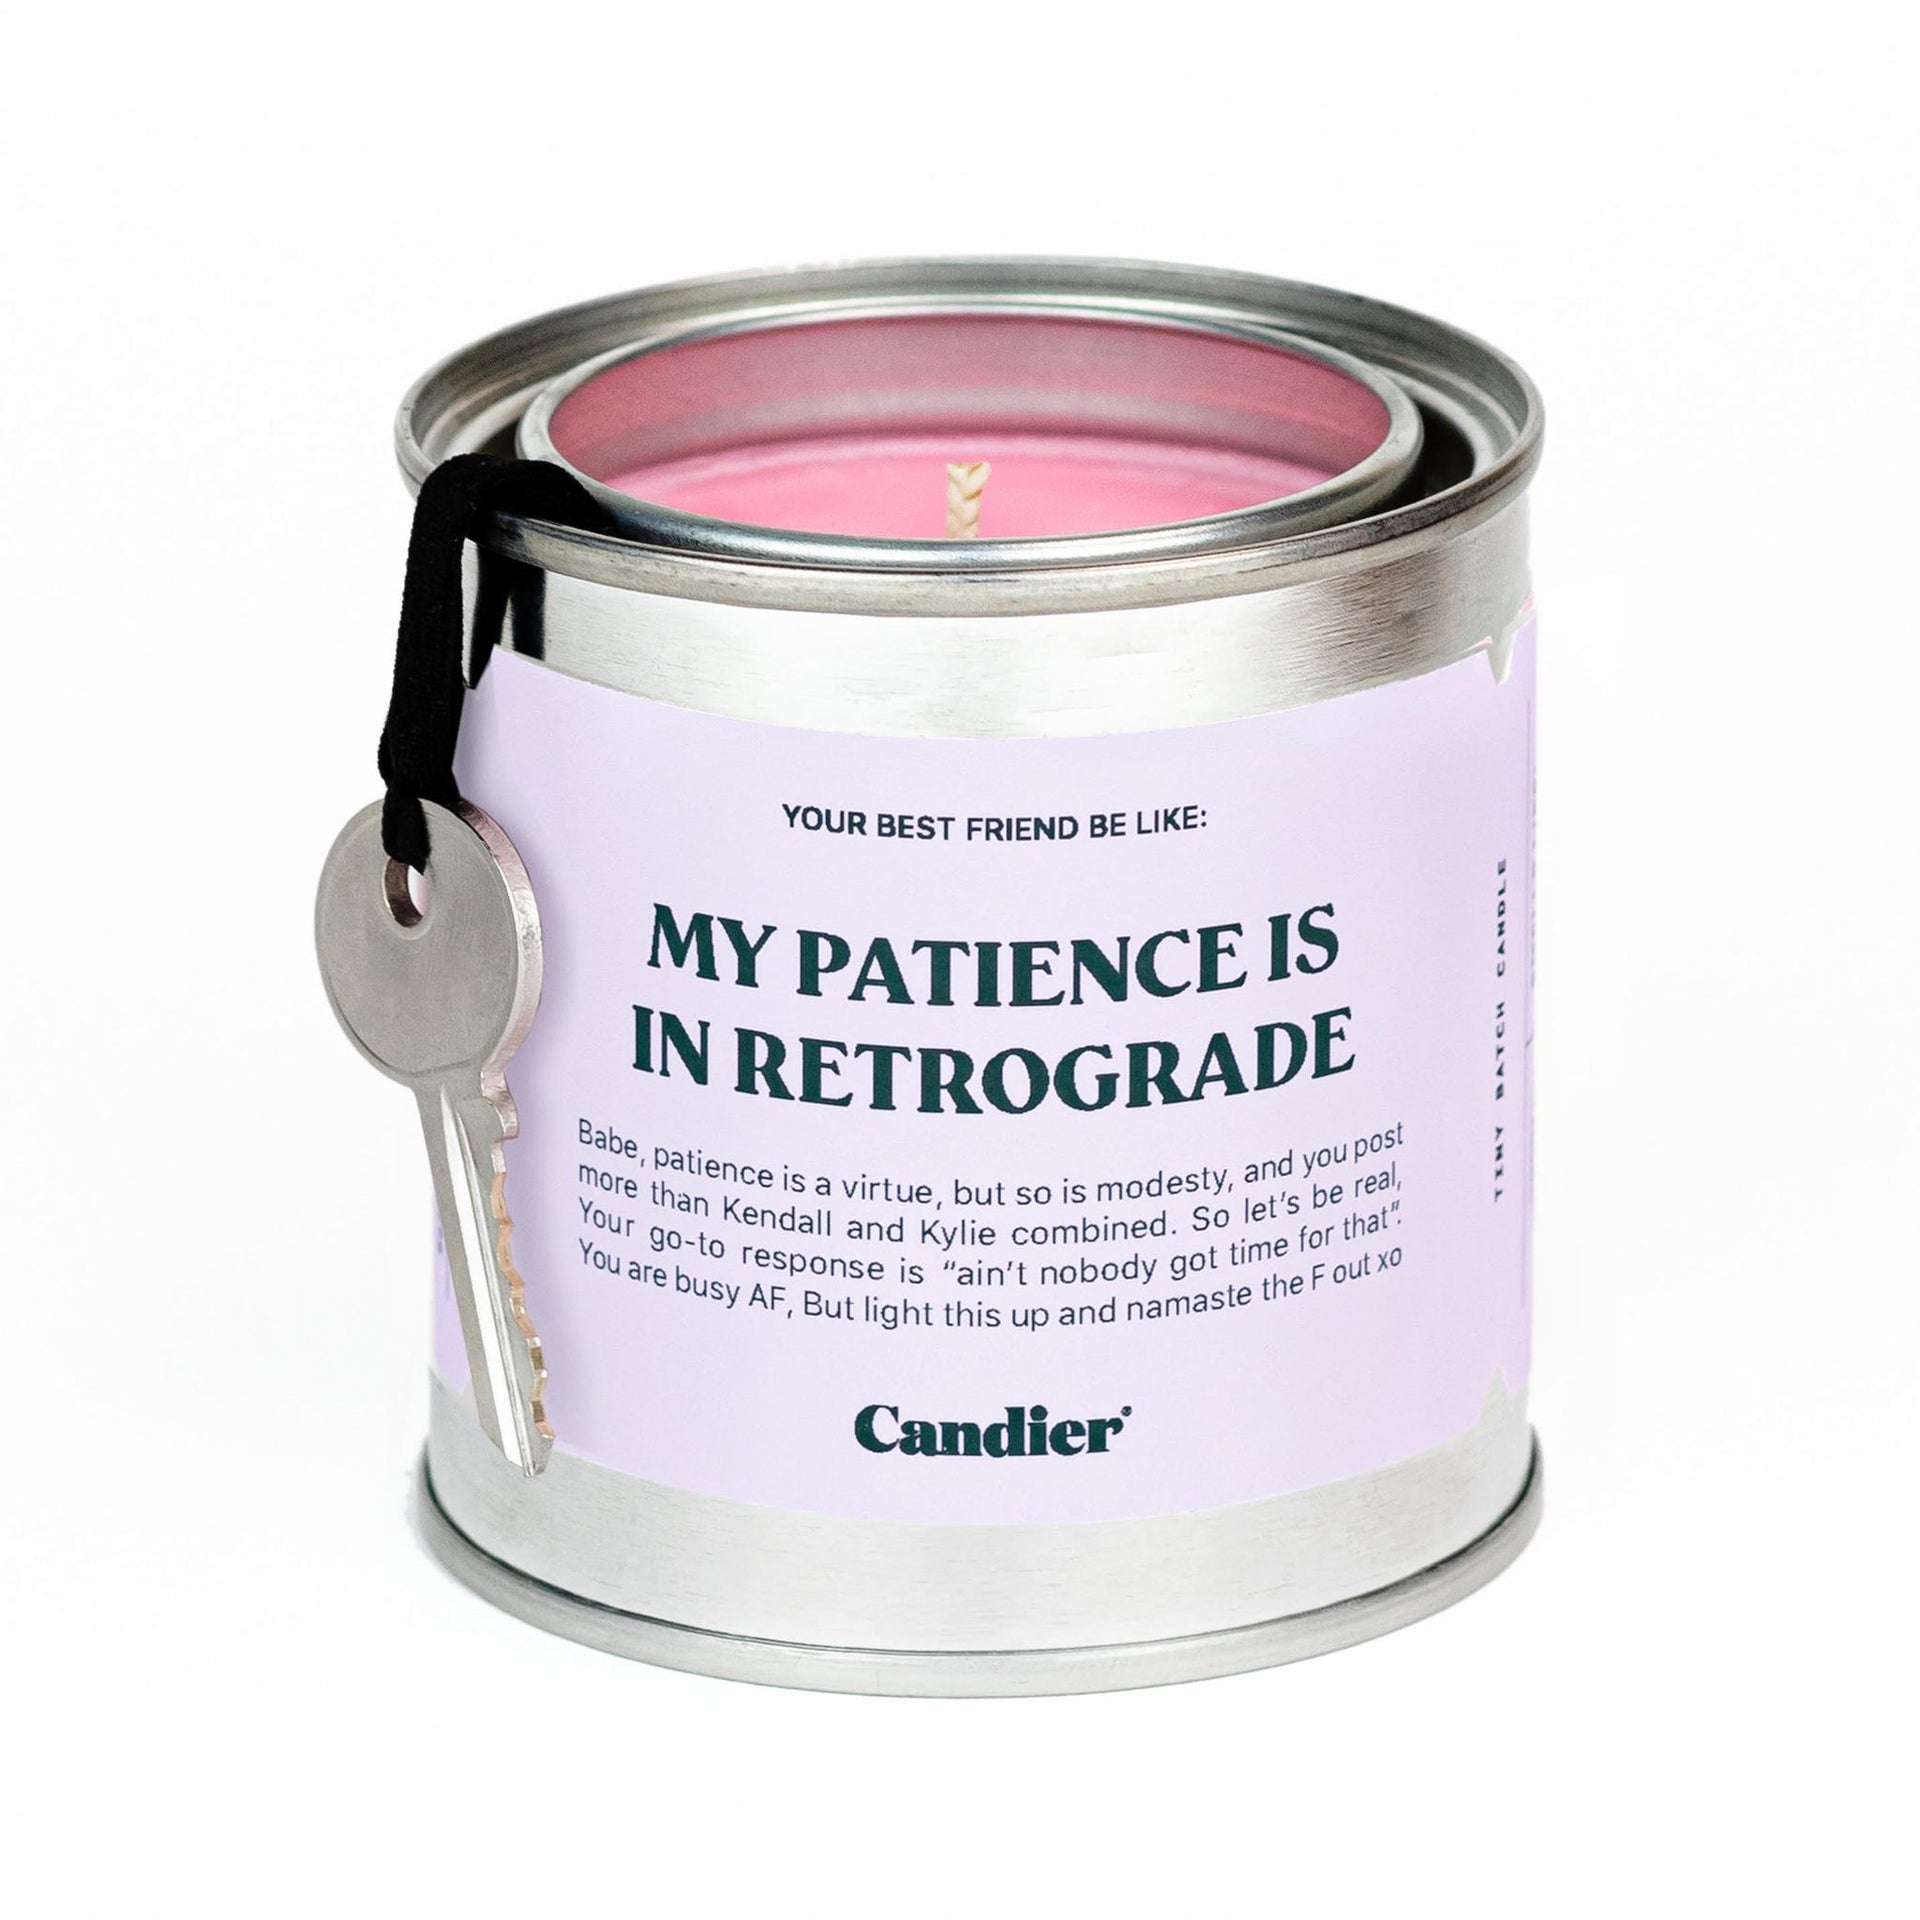 Patience in retrograde candle